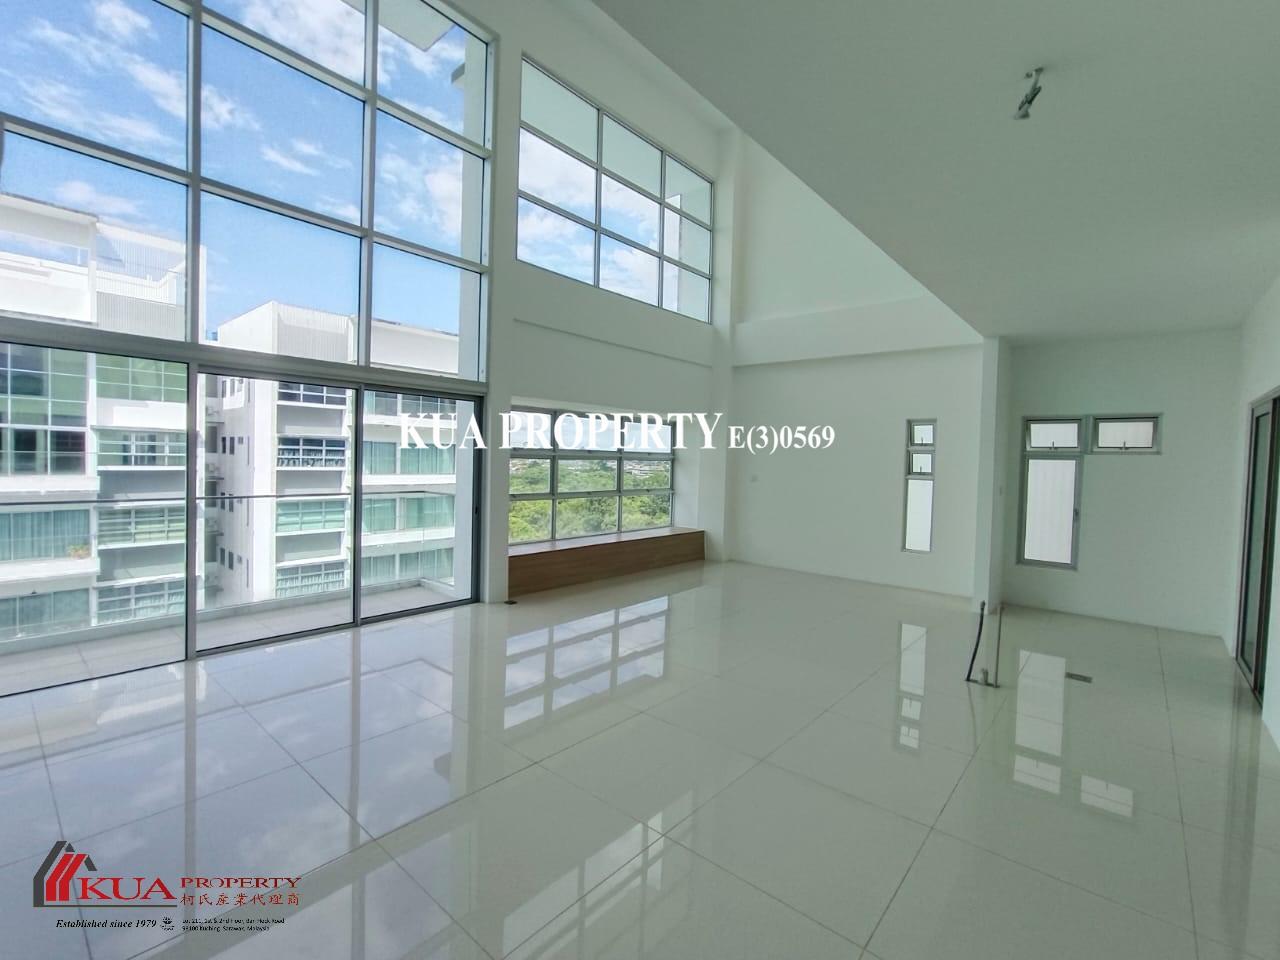 Inspire Heights Apartment (Penthouse) Unit For Sale! Located at Stapok